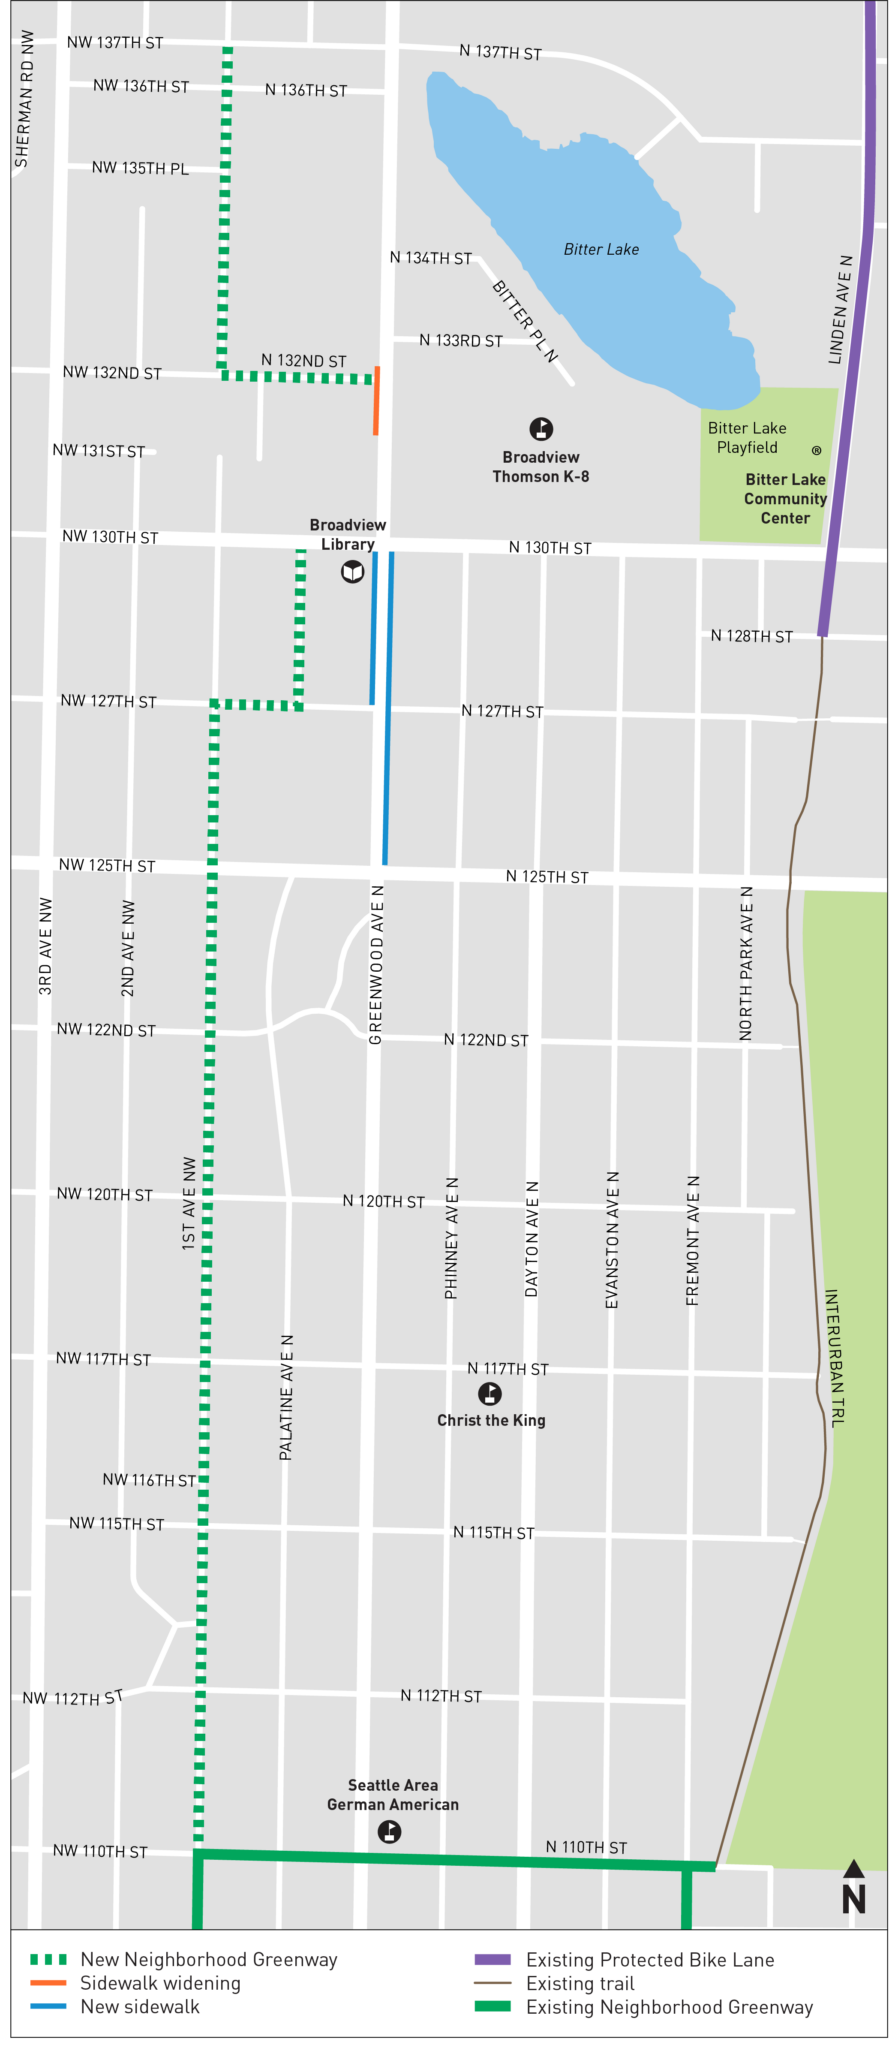 Map showing the location of improvements near Broadview Thomson K-8 School in Seattle. New sidewalks along Greenwood Ave N, between N 125th St and N 130th St on the east side, and between N 127th St and N 130th St on the west side, are shown in blue.